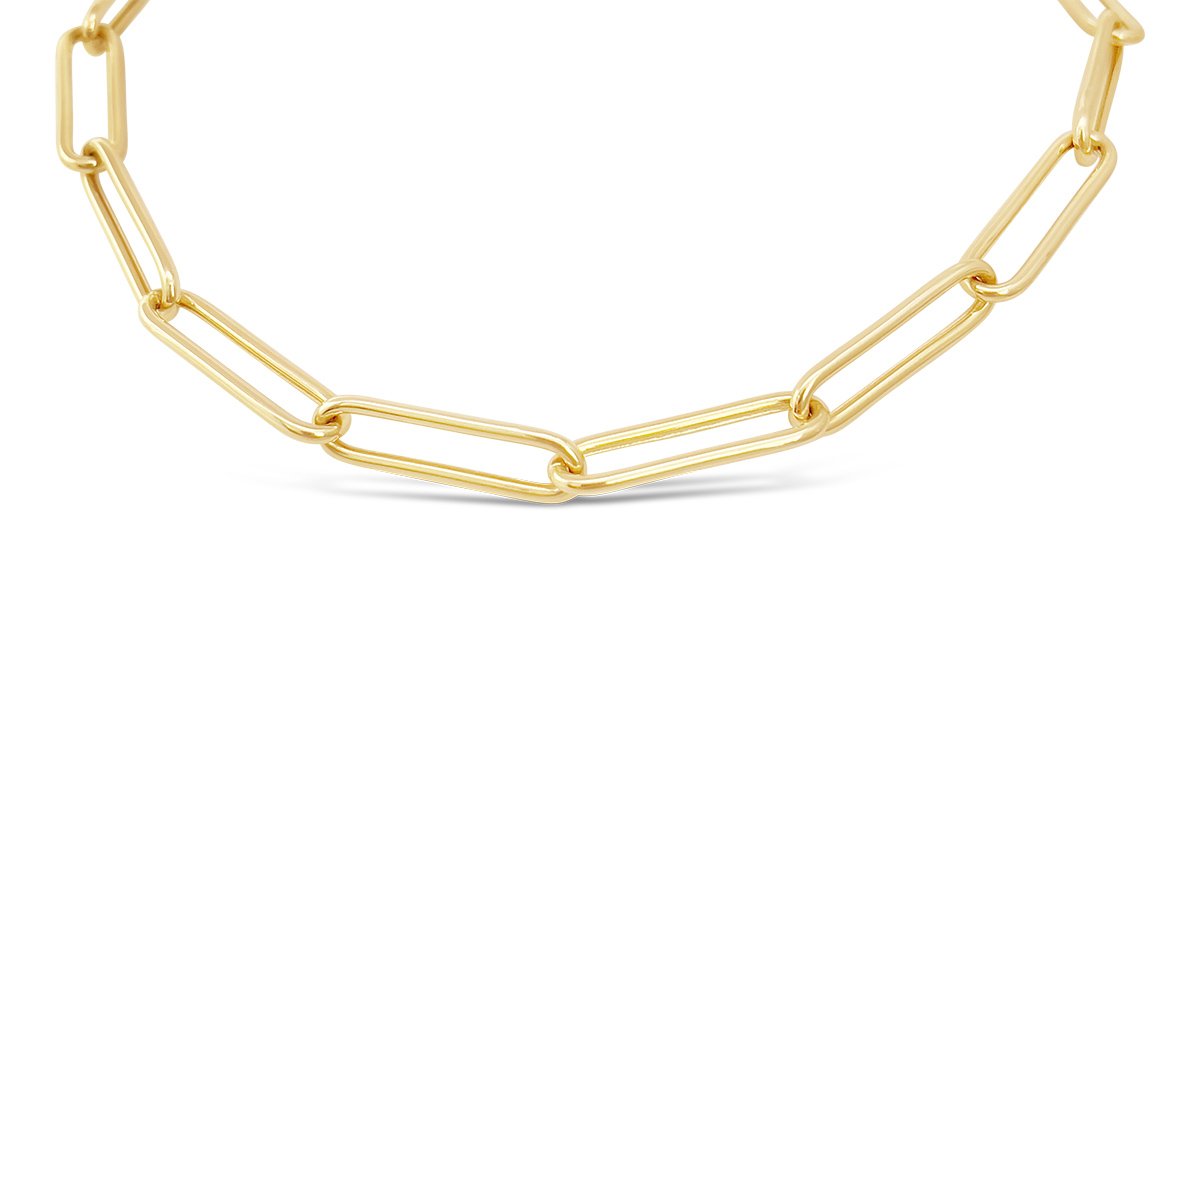 21 inch Paperclip Chain Necklace in 14K Yellow Gold